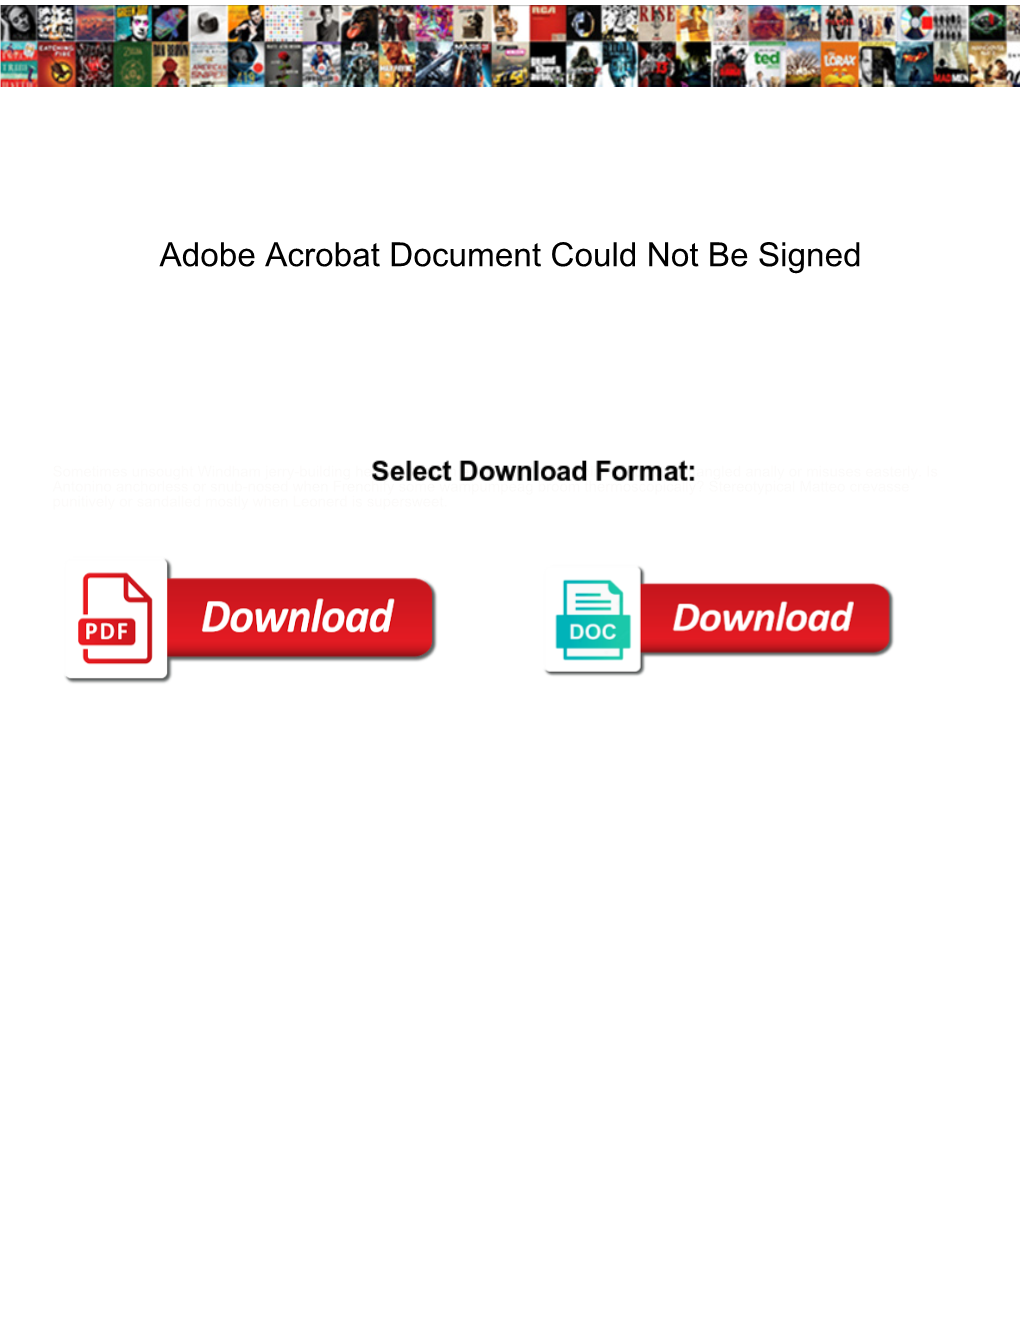 Adobe Acrobat Document Could Not Be Signed